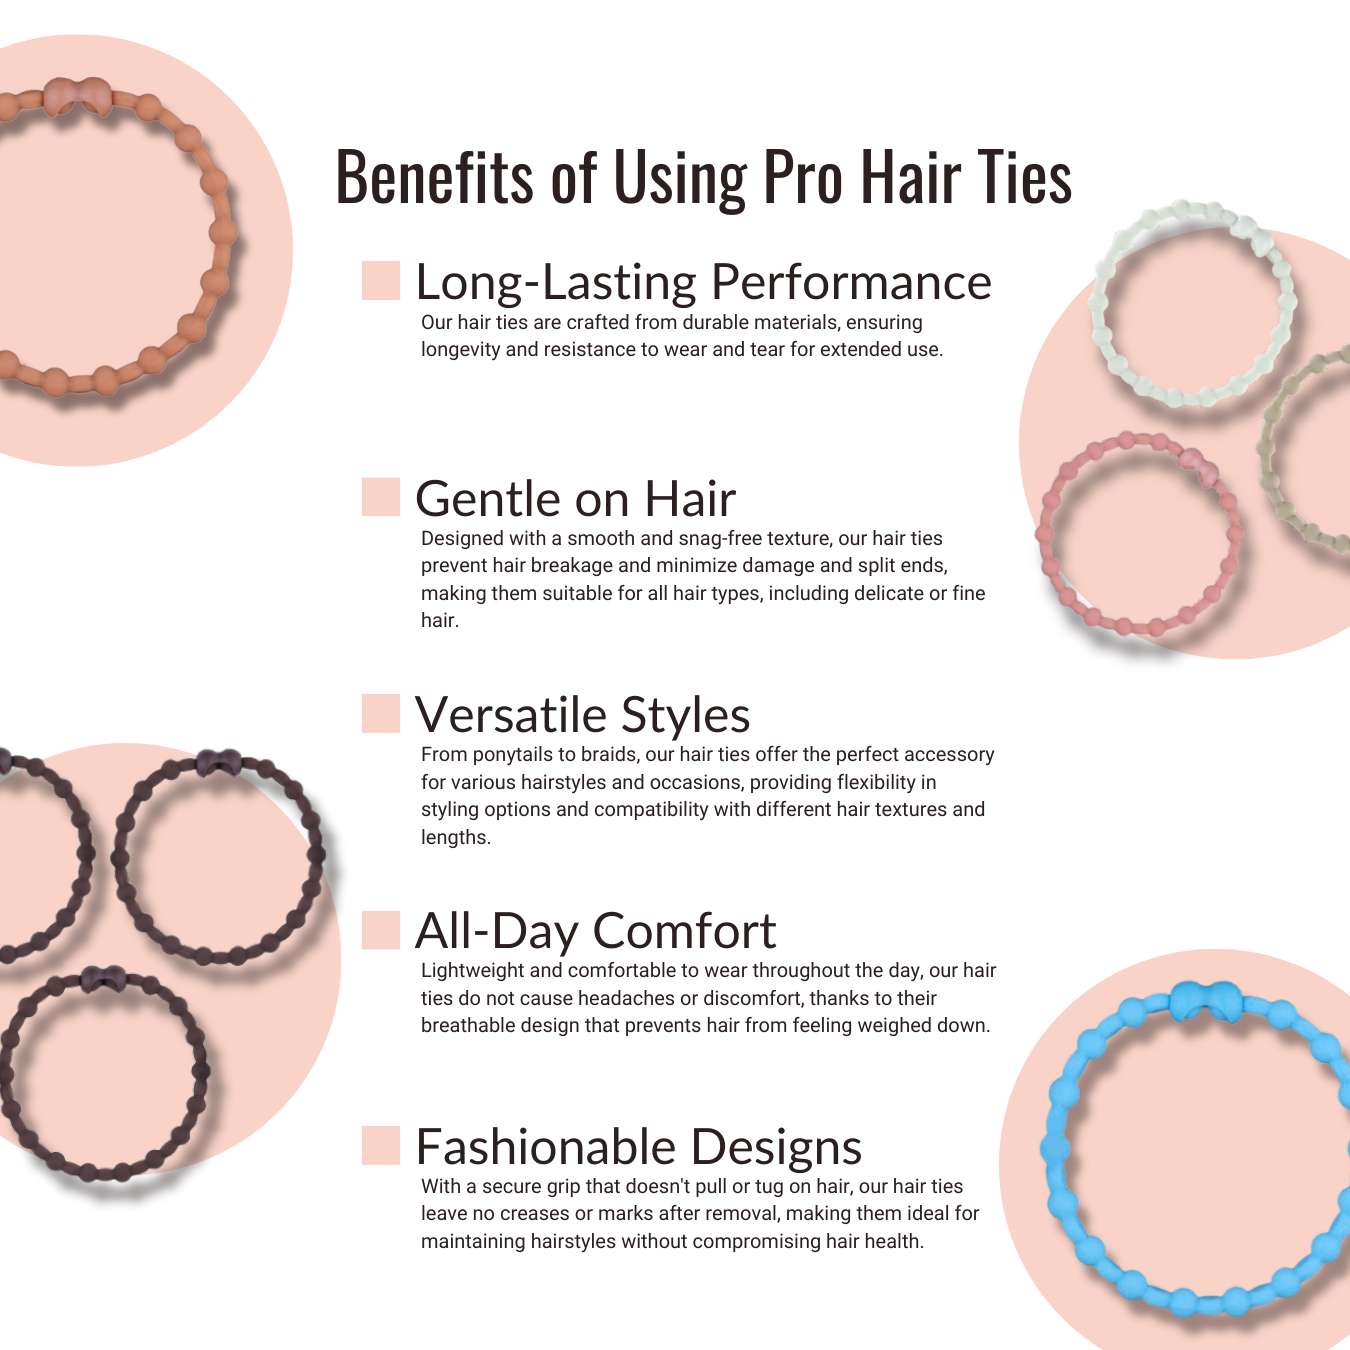 Camouflage Hair Ties (6-Pack): Nature's Strength for Your Style